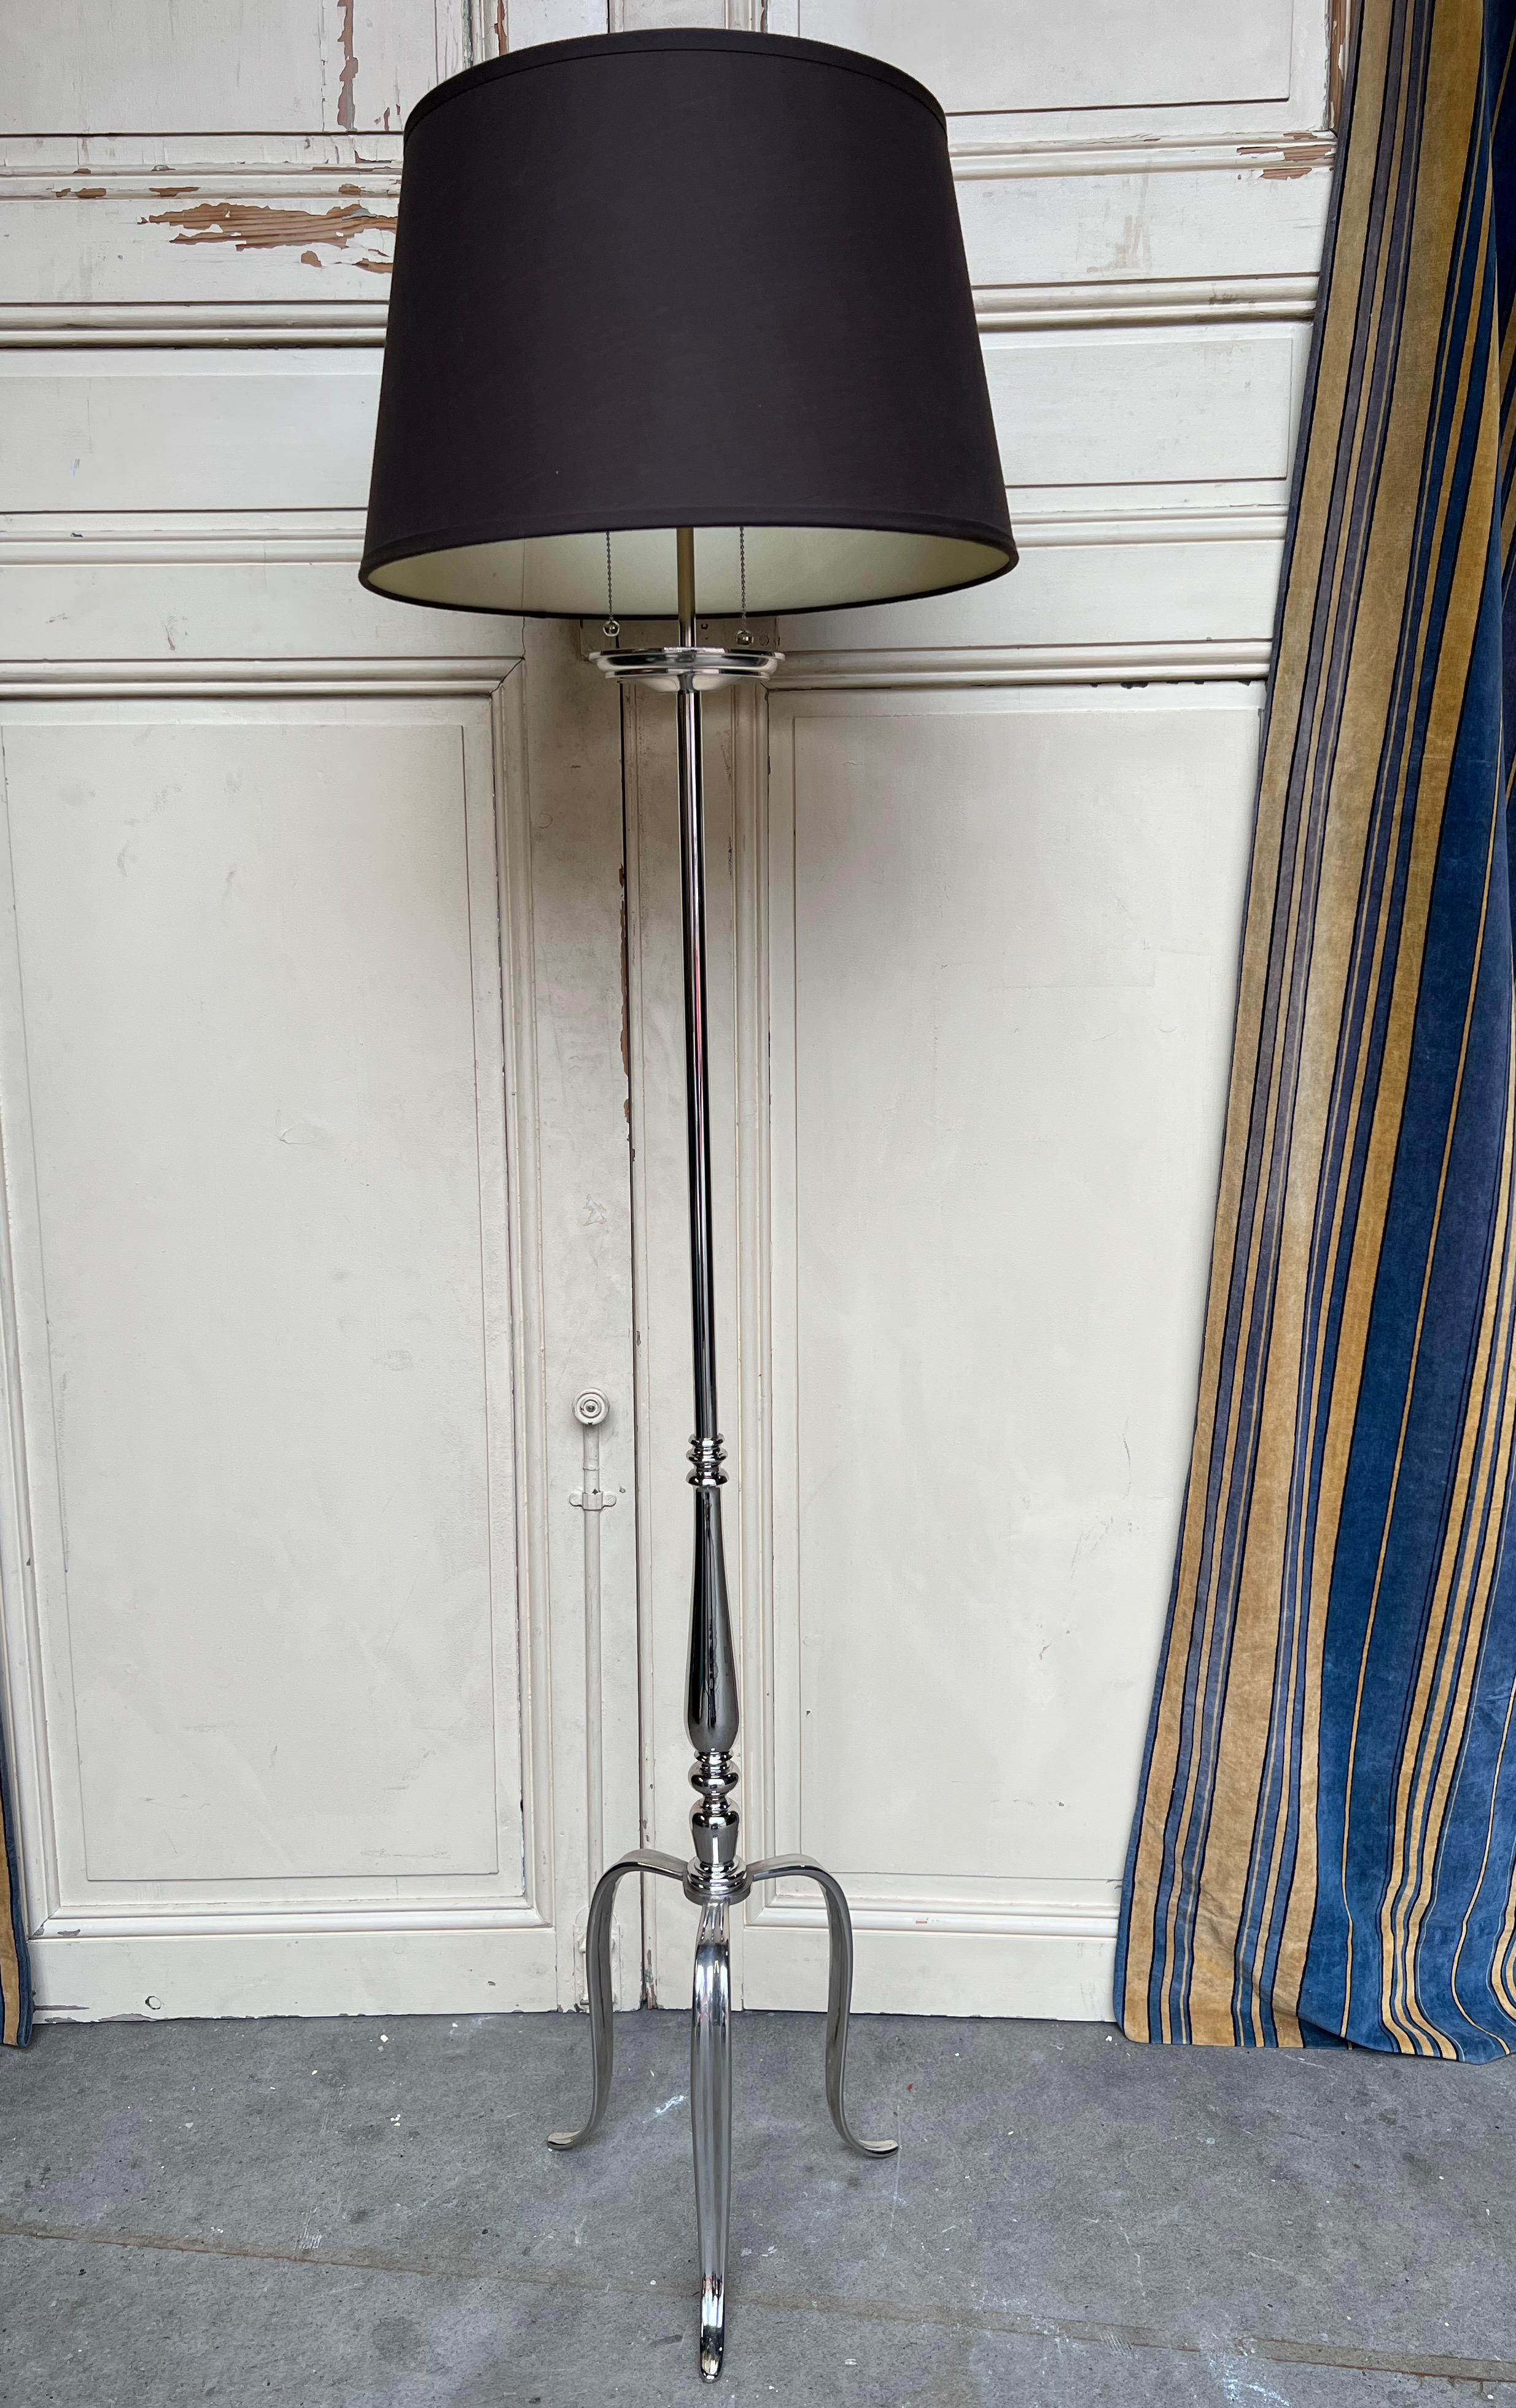 This elegant French mid-century modern brass floor lamp from the 1950s has  a lustrous polished nickel finish, adding a touch of sophistication. Supported by a tripod base, the lamp features turned bronze accents and a beautiful bobeche. It has been